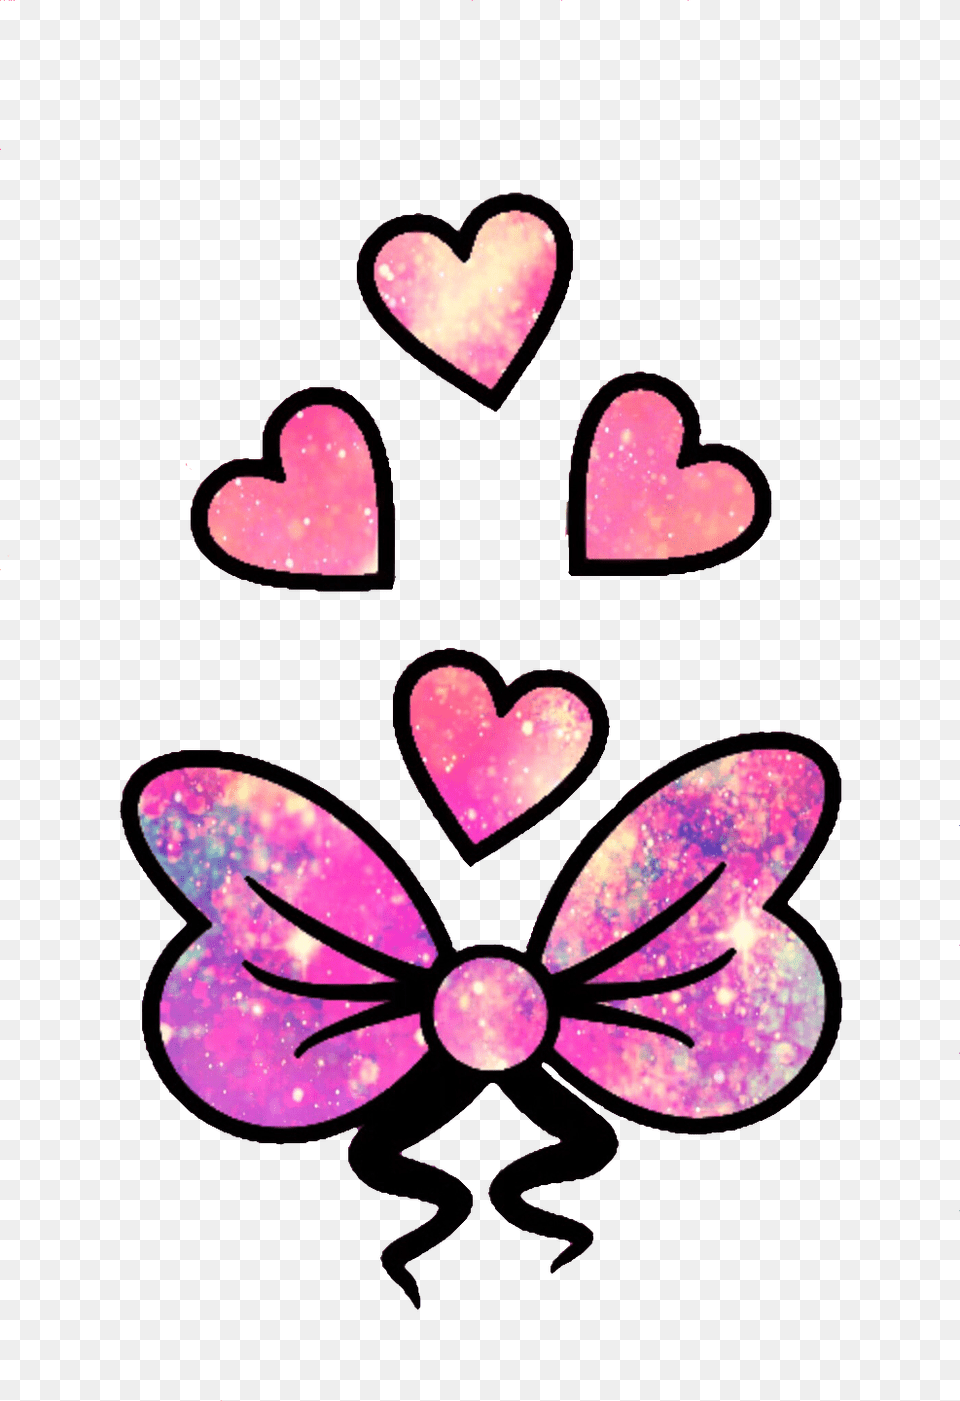 Glitter Sparkle Galaxy Cute Girly Bow Hearts Love Pink Portable Network Graphics, Purple, Accessories Png